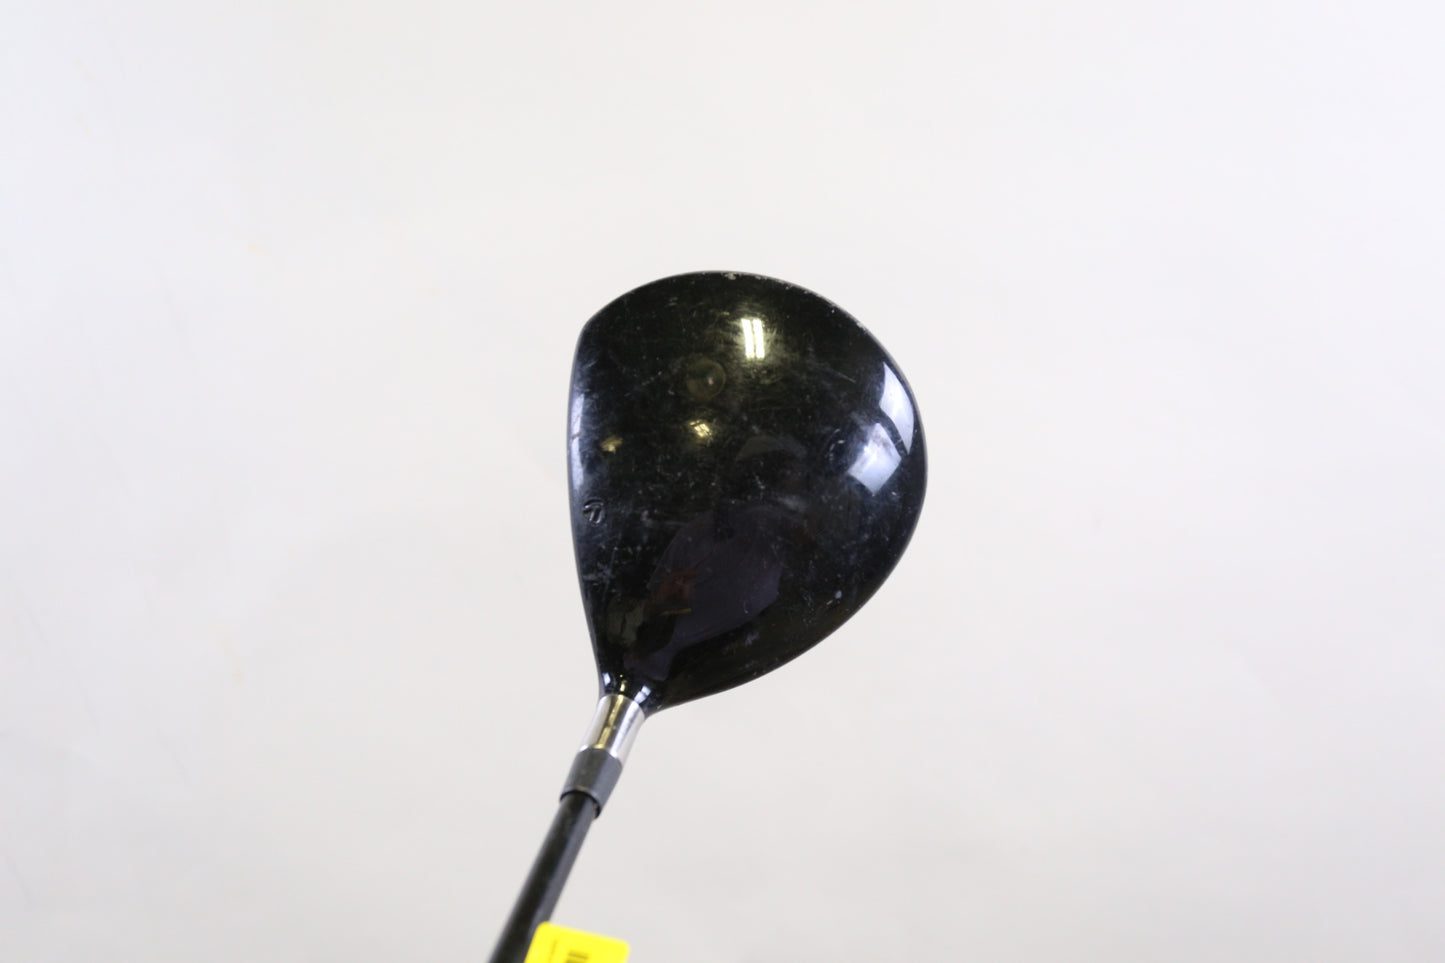 Used TaylorMade R540 Driver - Right-Handed - 9.5 Degrees - Stiff Flex